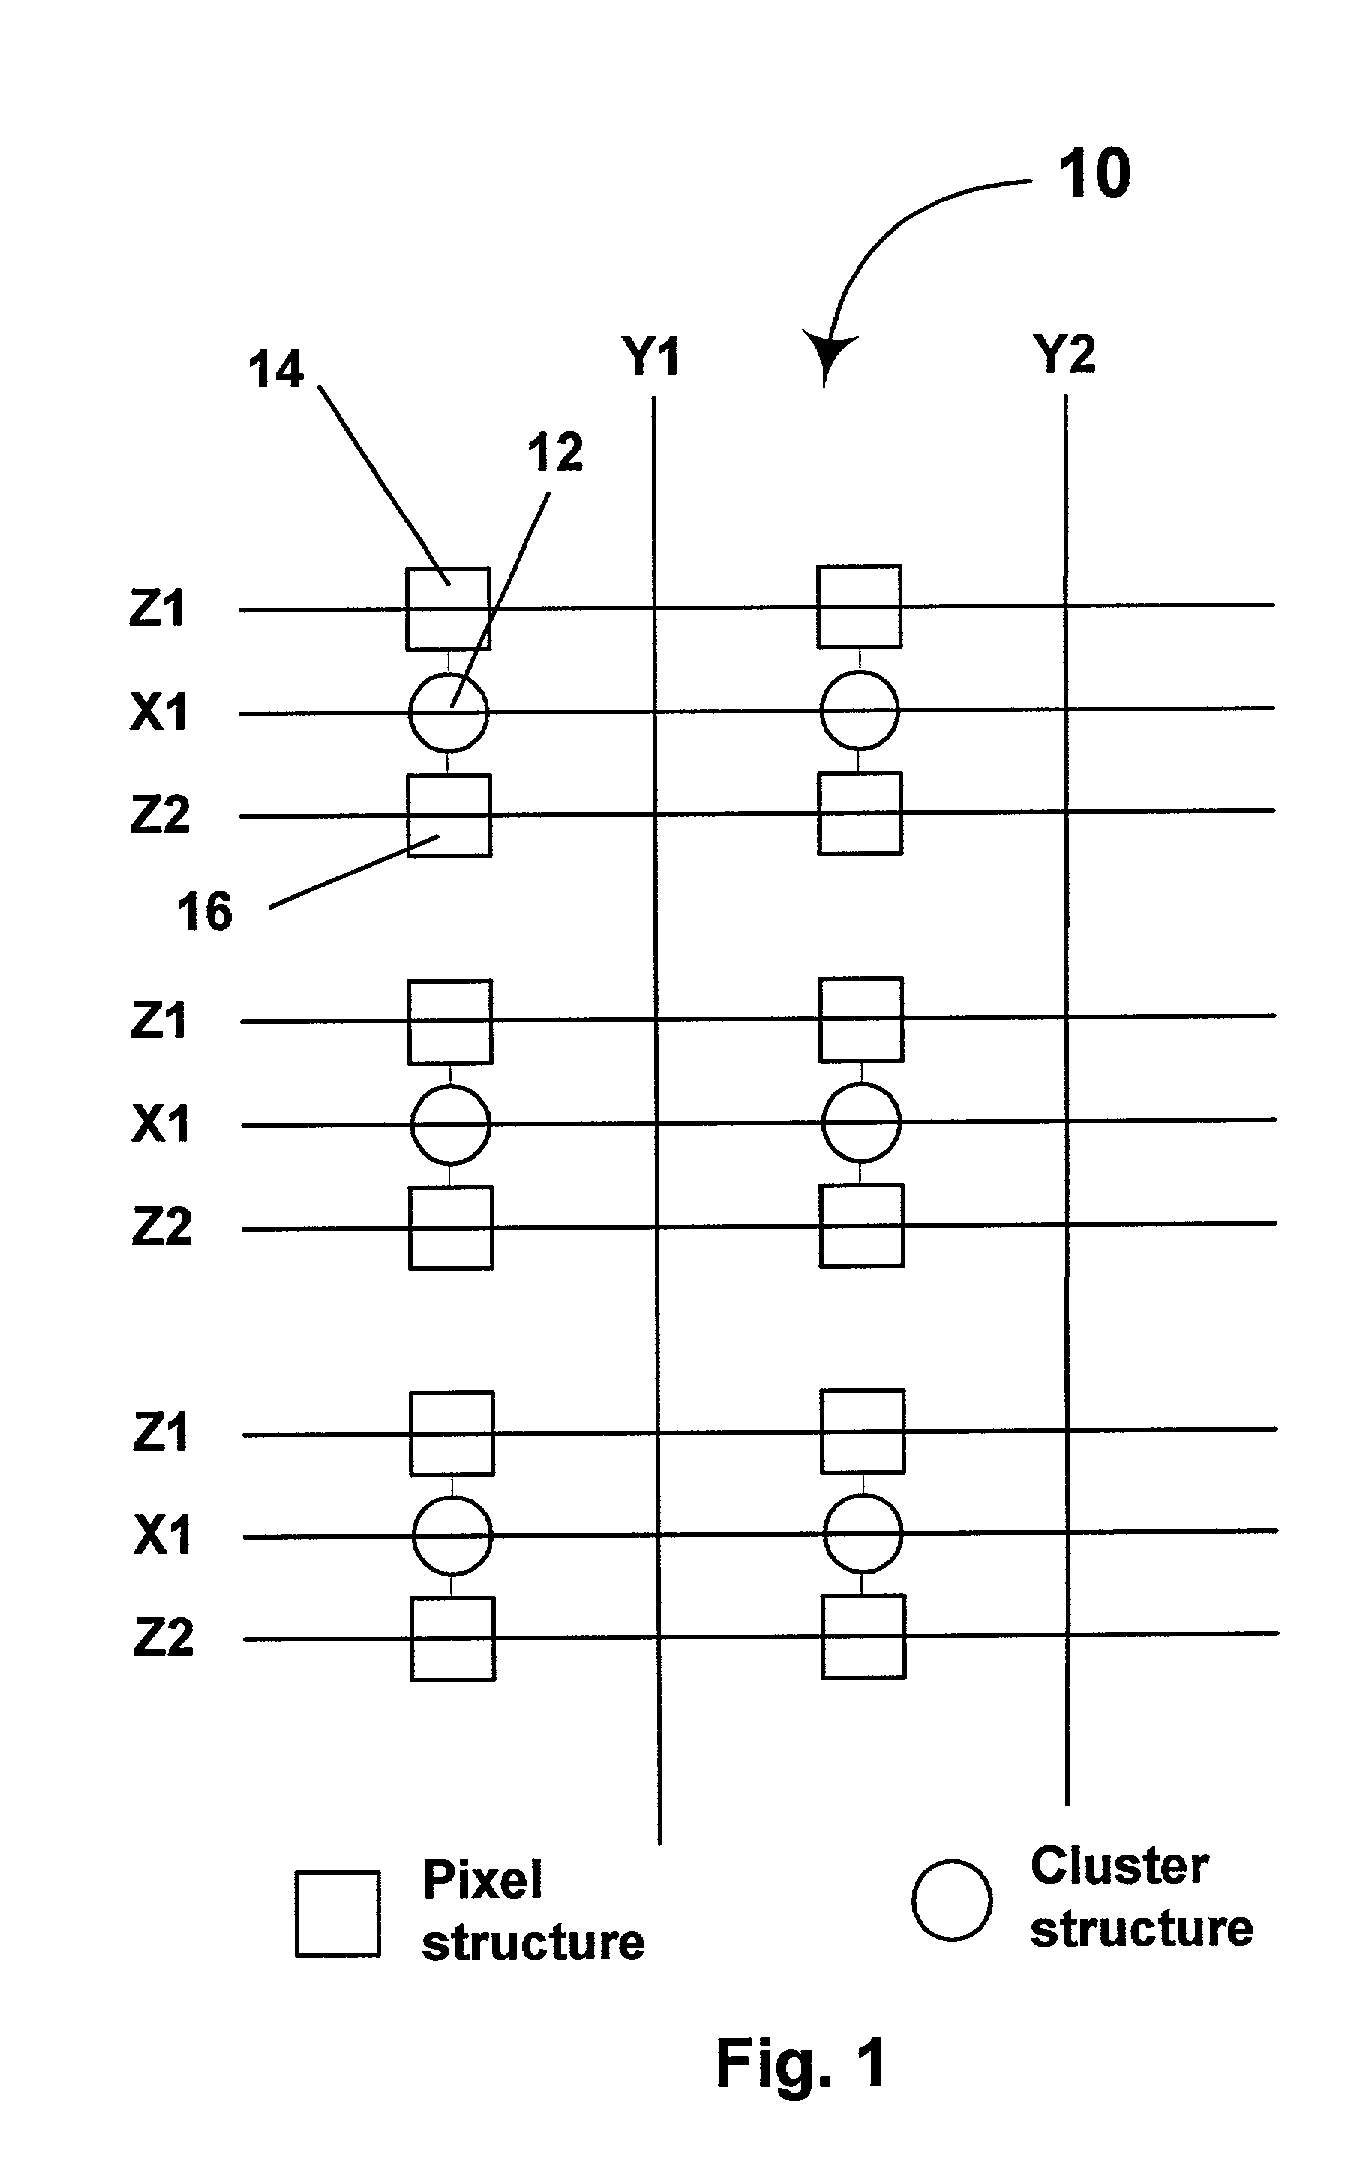 Electronic display with photo-addressing means